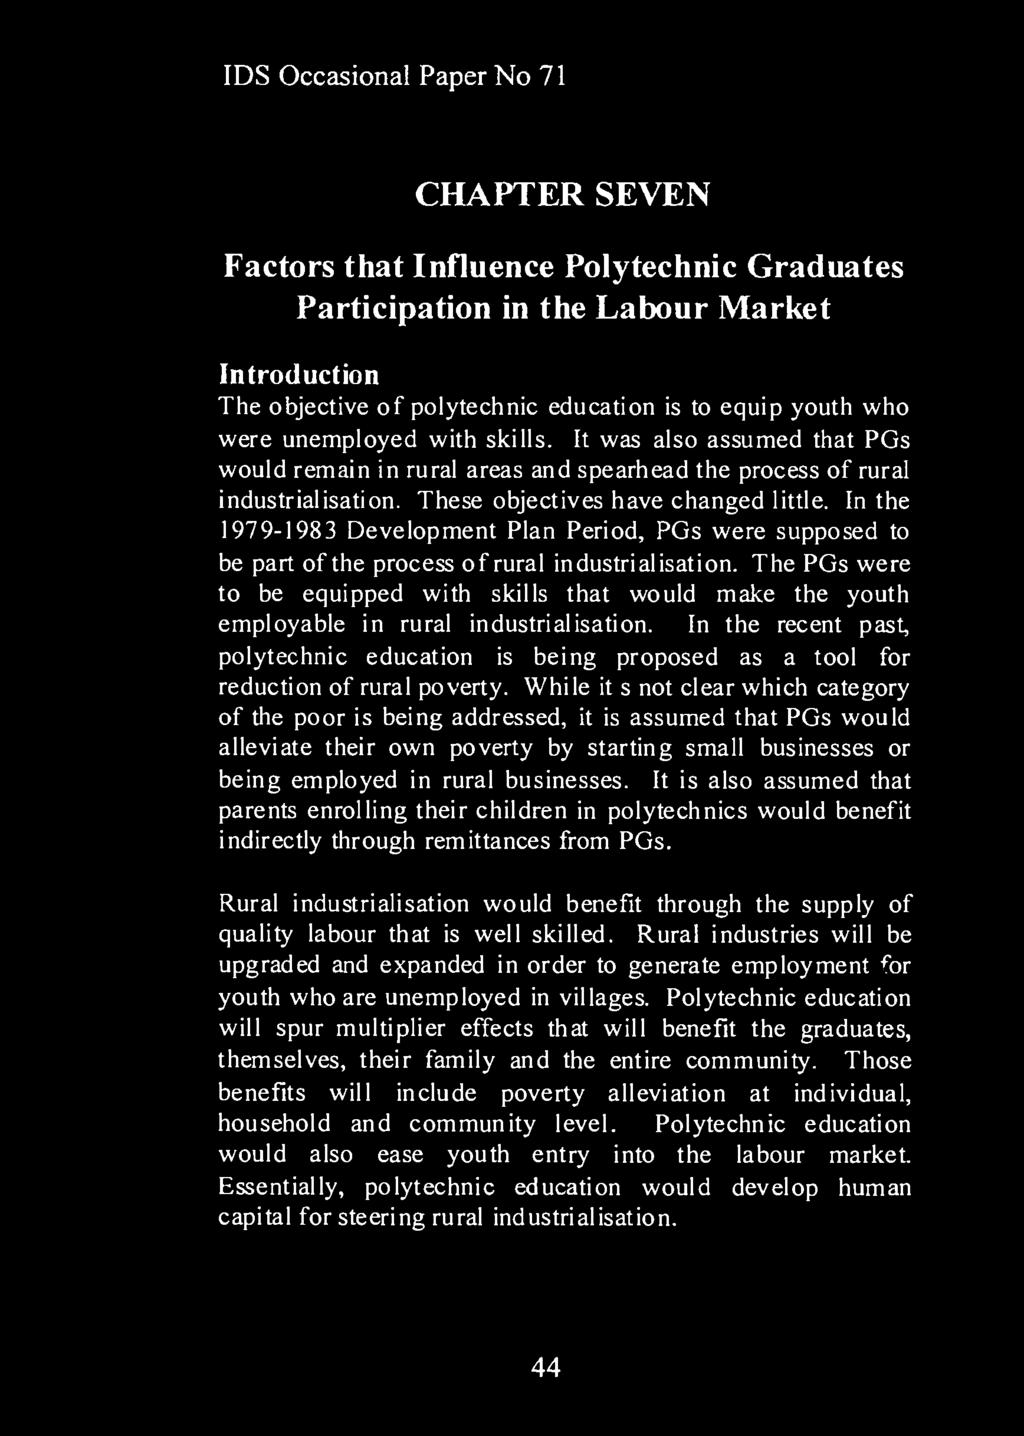 CHAPTER SEVEN Factors that Influence Polytechnic Graduates Participation in the Labour Market Introduction The objective of polytechnic education is to equip youth who were unemployed with skills.